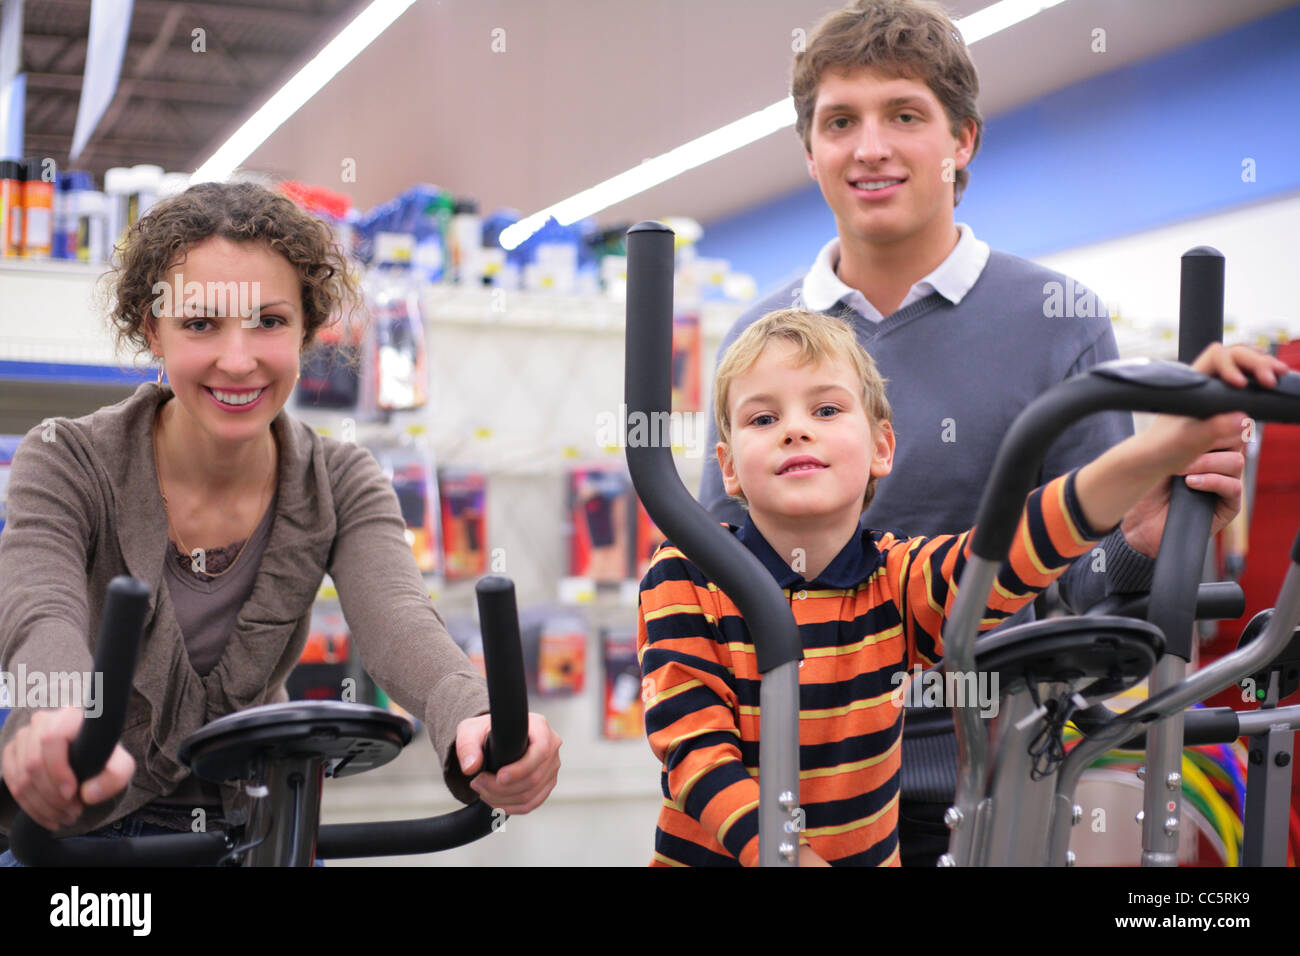 Parents with son on sports training apparatus in shop, focus on boy Stock Photo